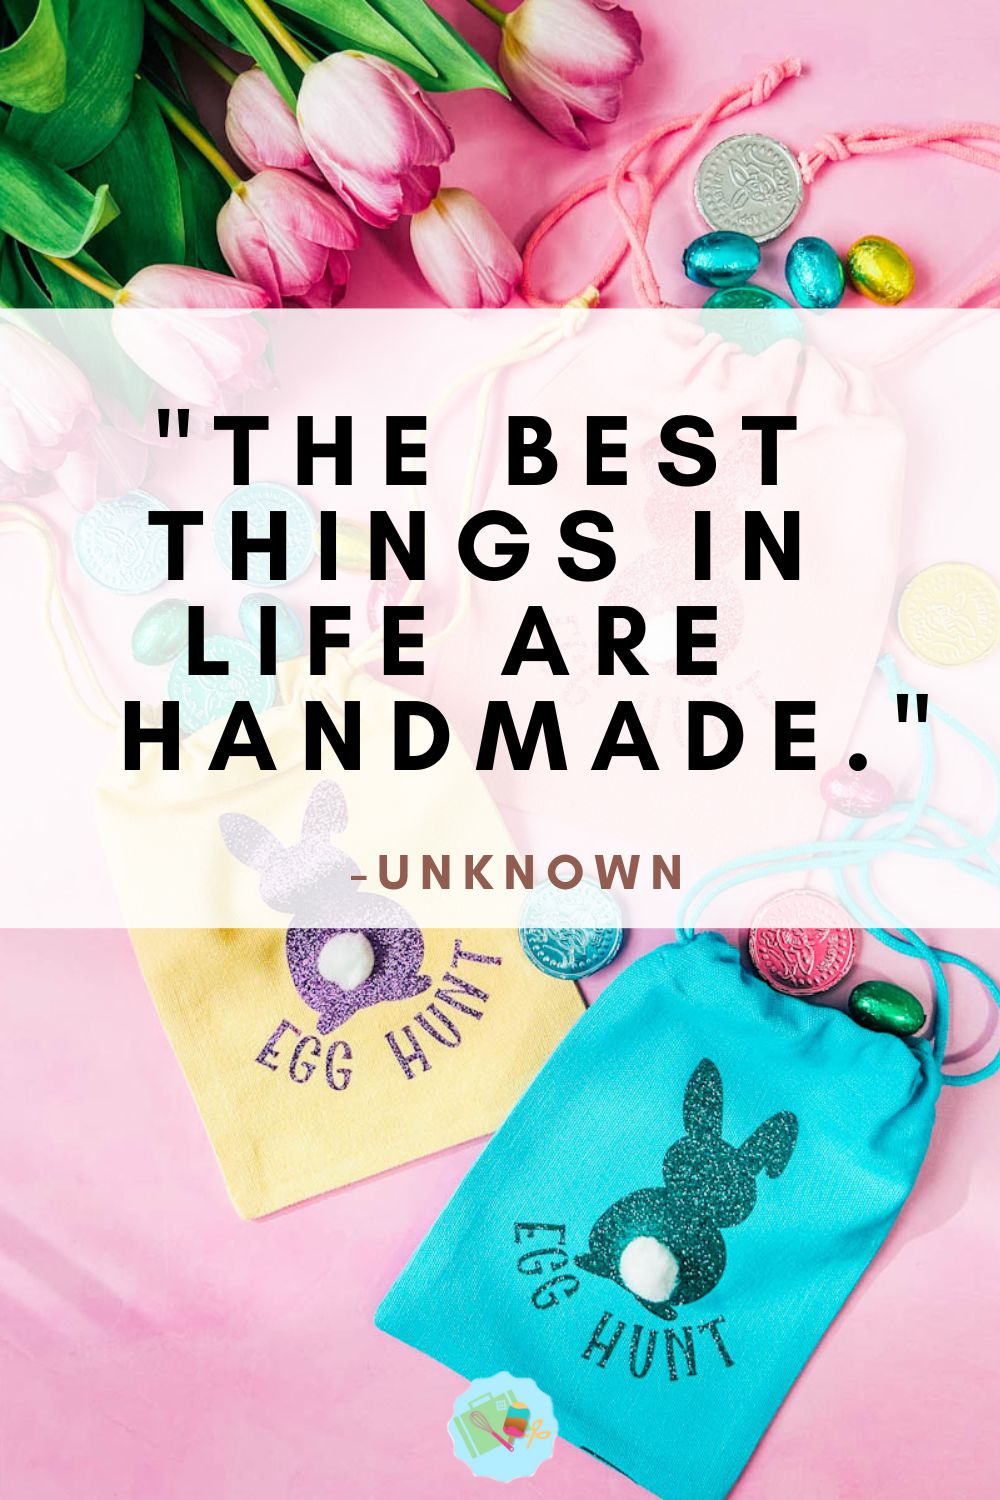 The best things in life are handmade.